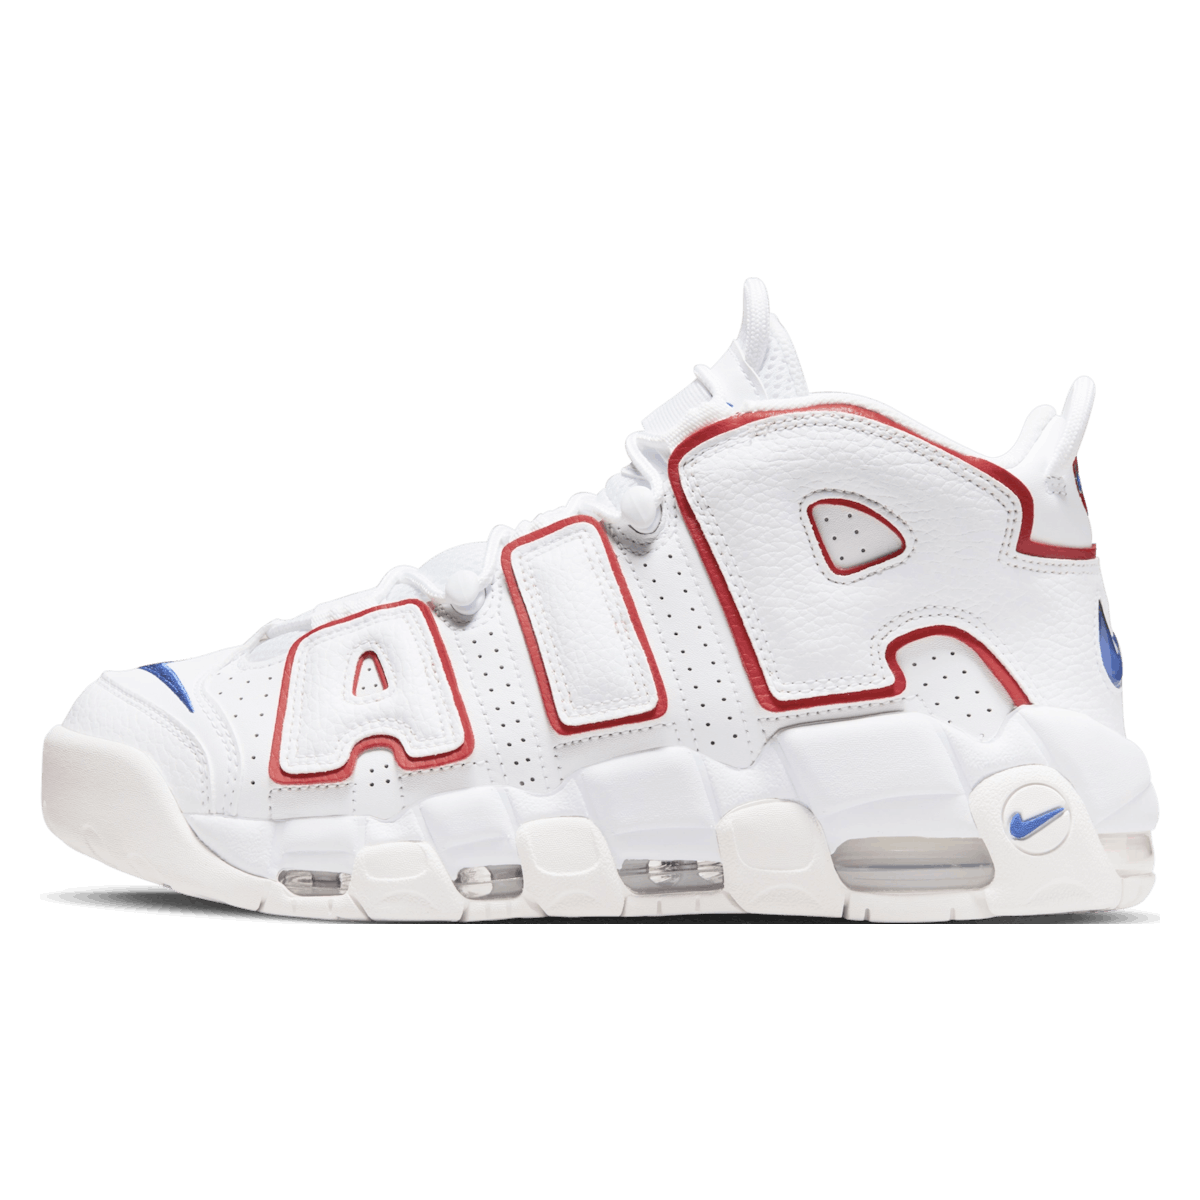 Nike Air More Uptempo '96 "White University Red"